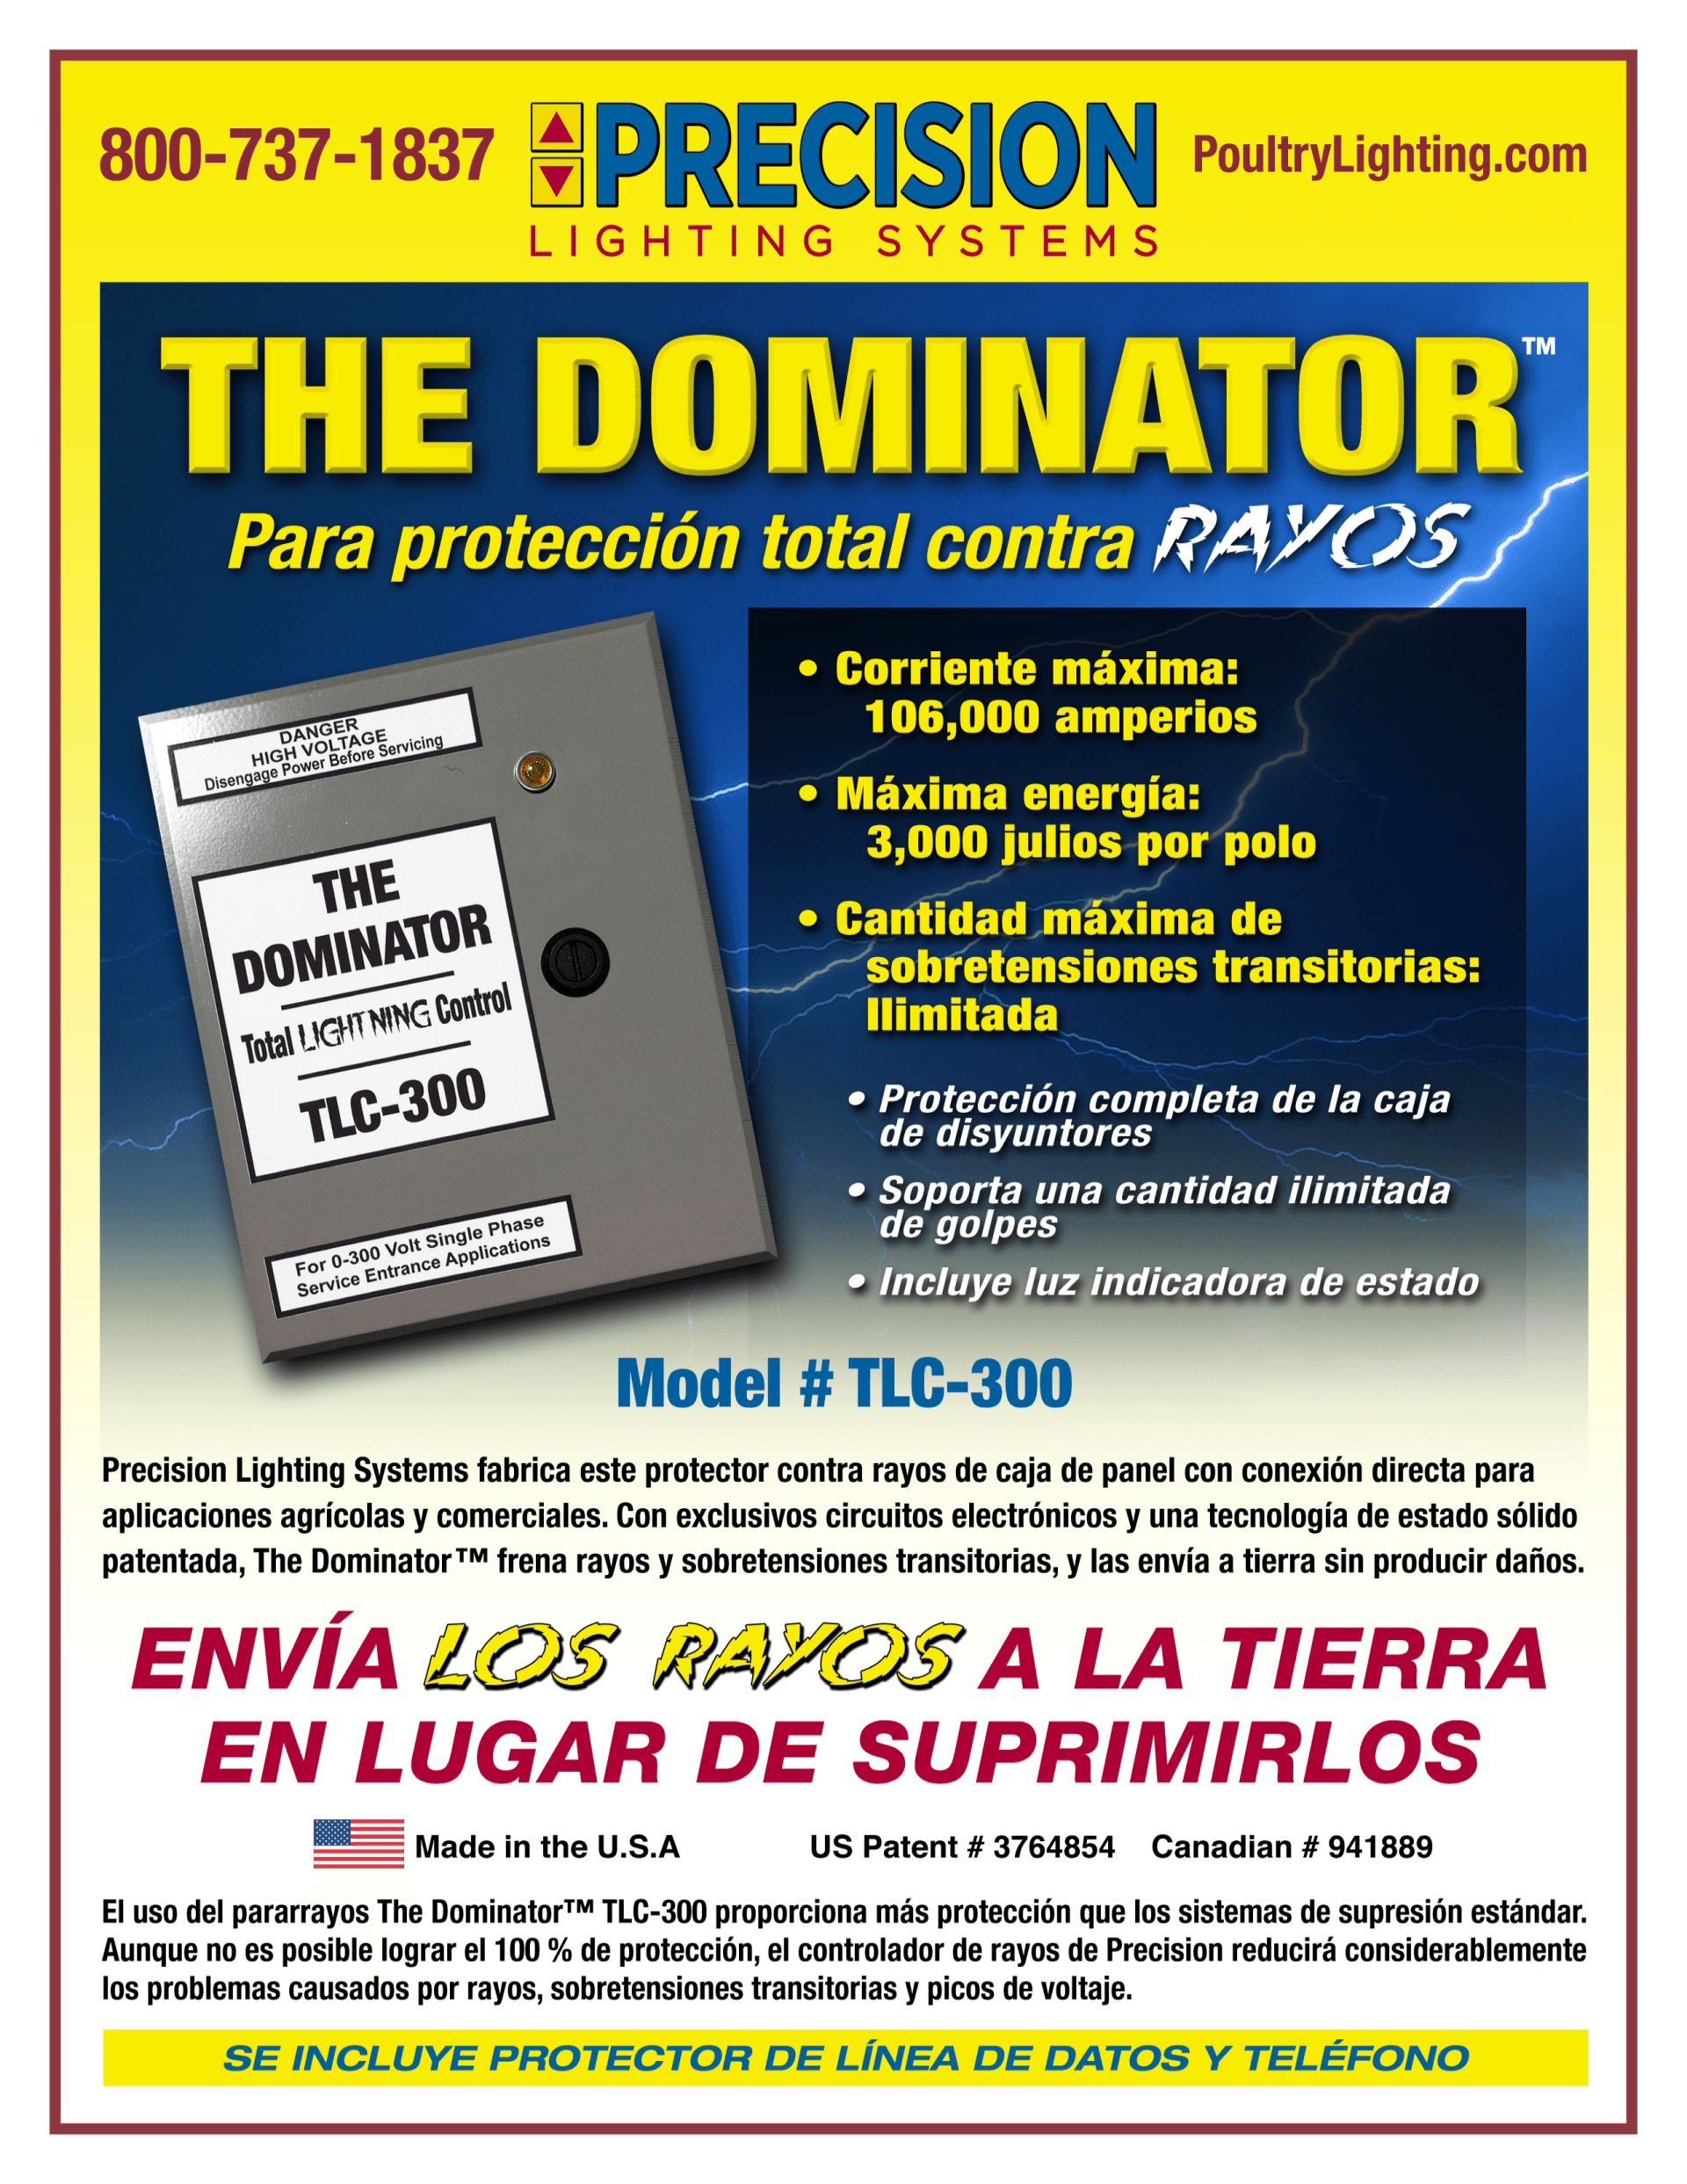 An advertisement for the dominator lightning protection system in spanish.